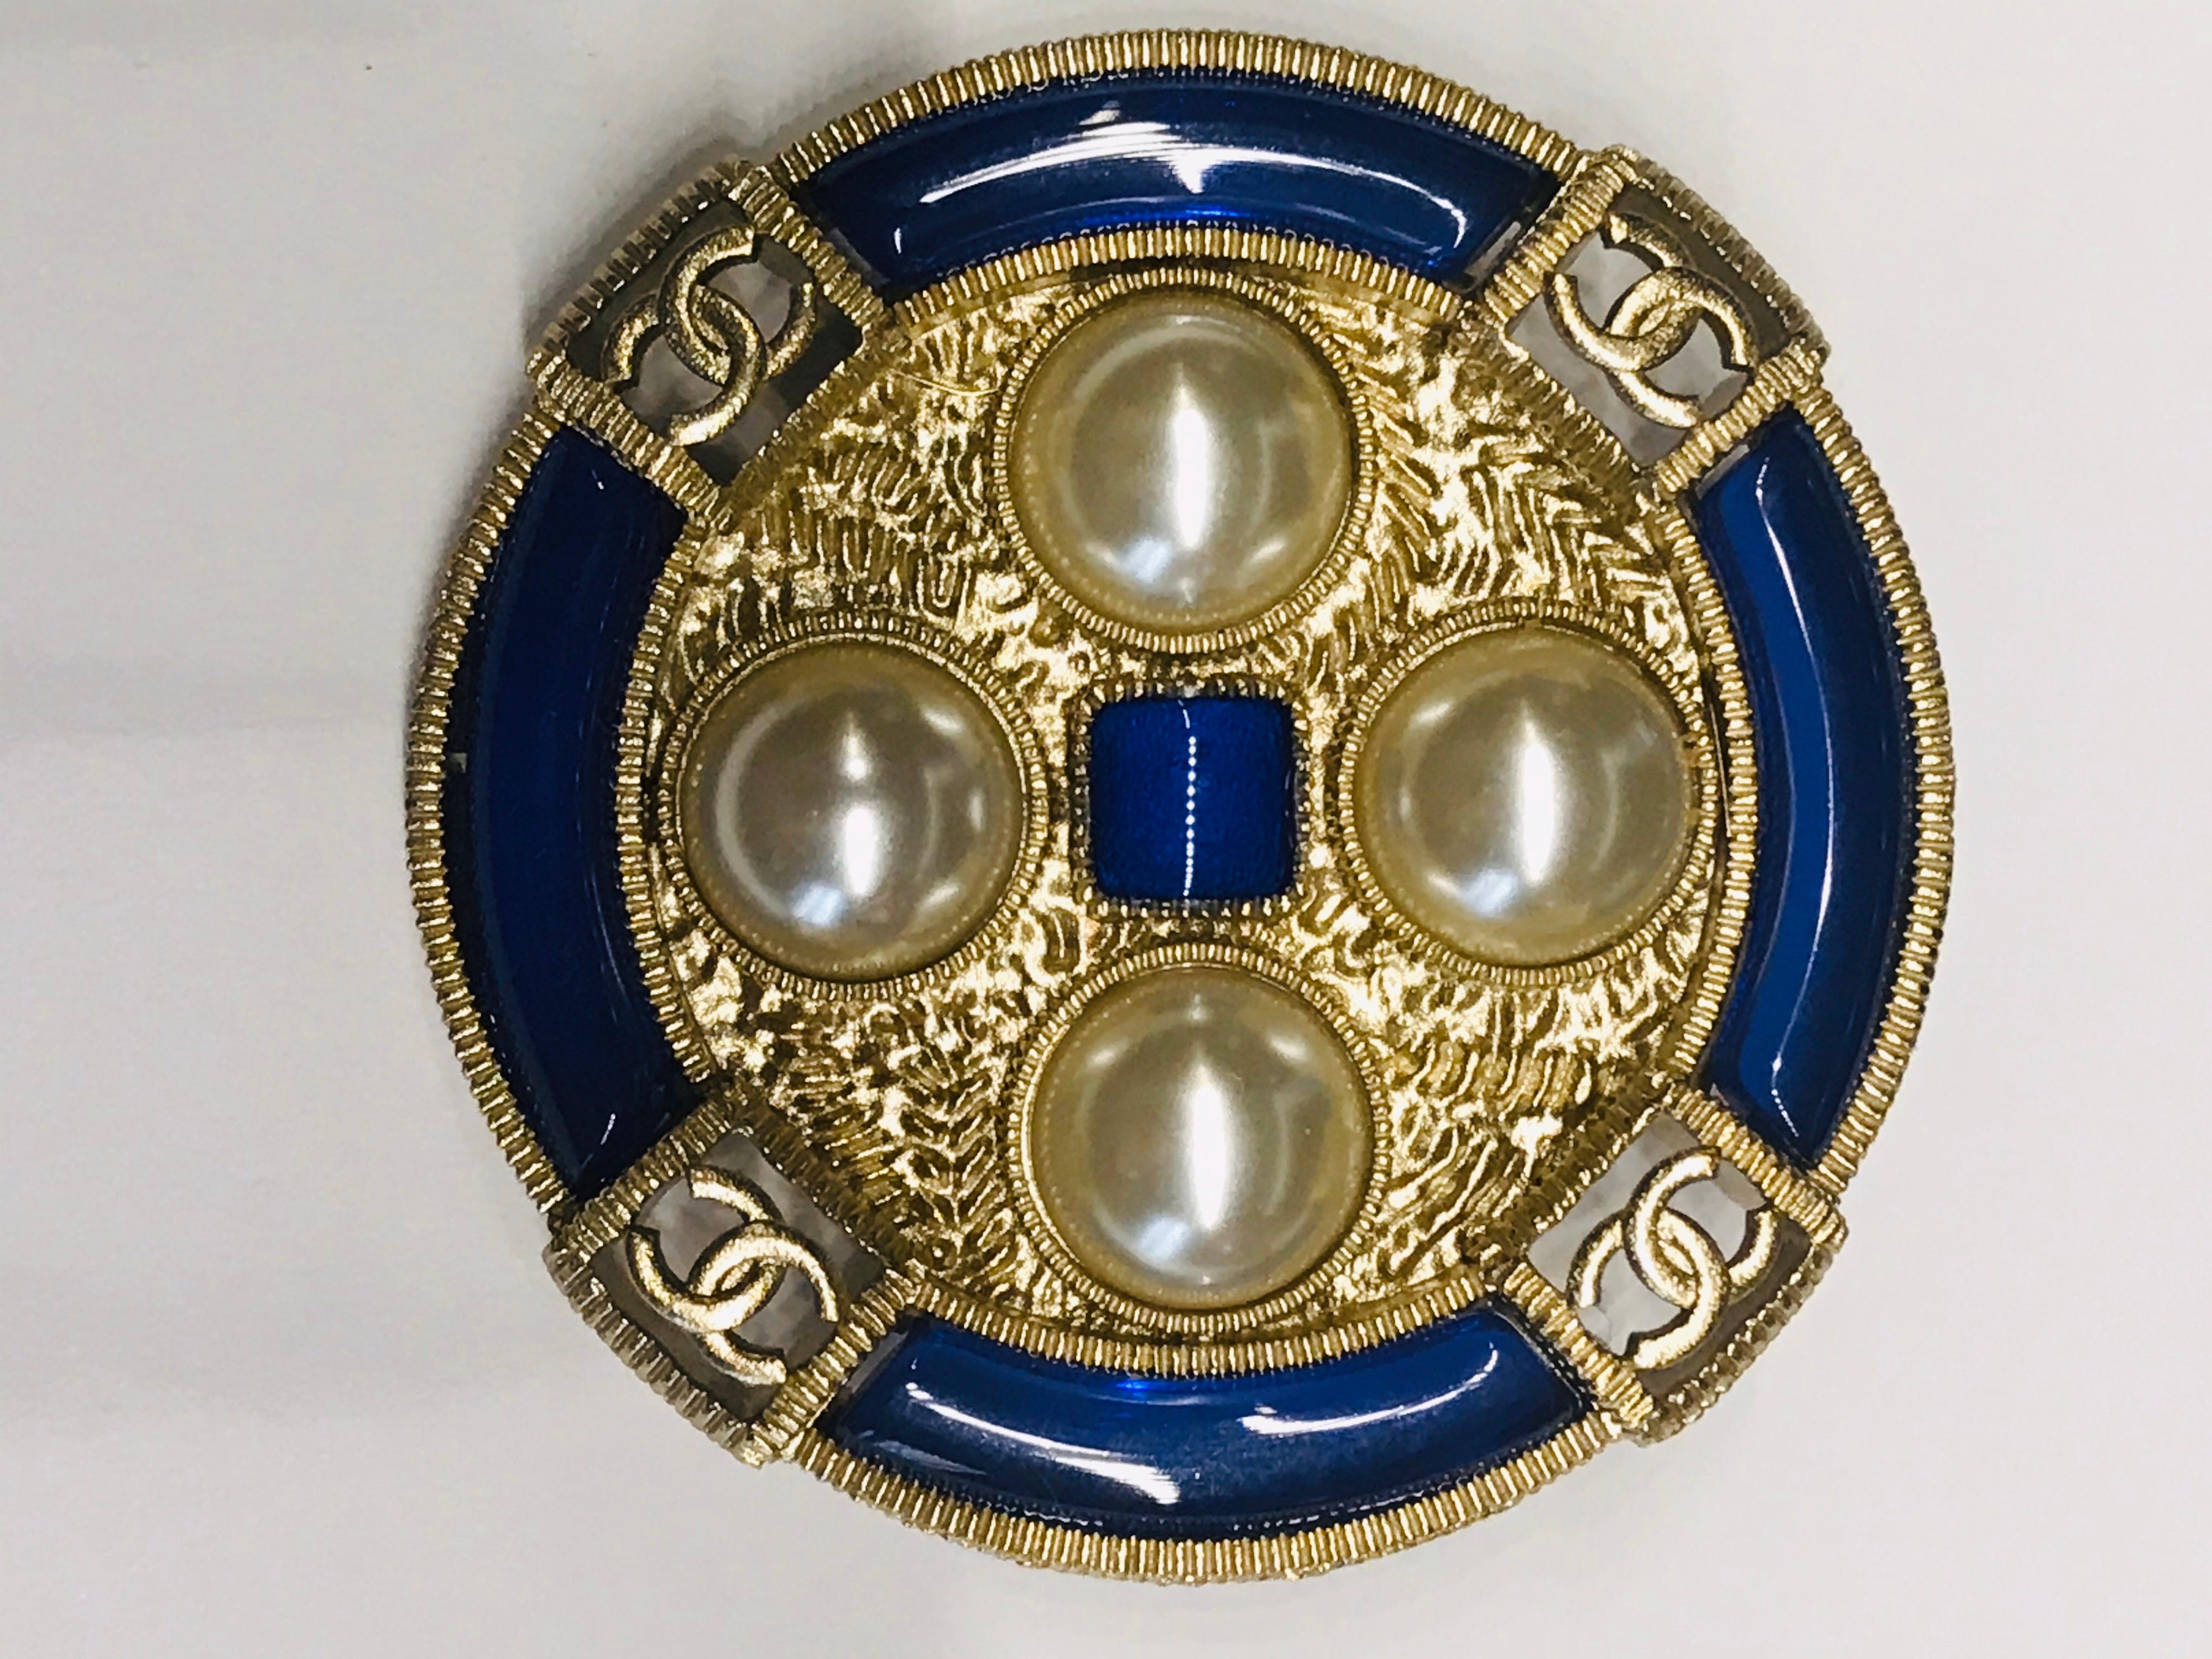 A lovely light gold, faux pearl cabochon and blue lucite pin with four cut out interlocking CC logos. The pin is 1.75” in diameter and has the oval Chanel signature plaque on back. It is inscribed “Chanel with registry and copyright stamps, 19 on